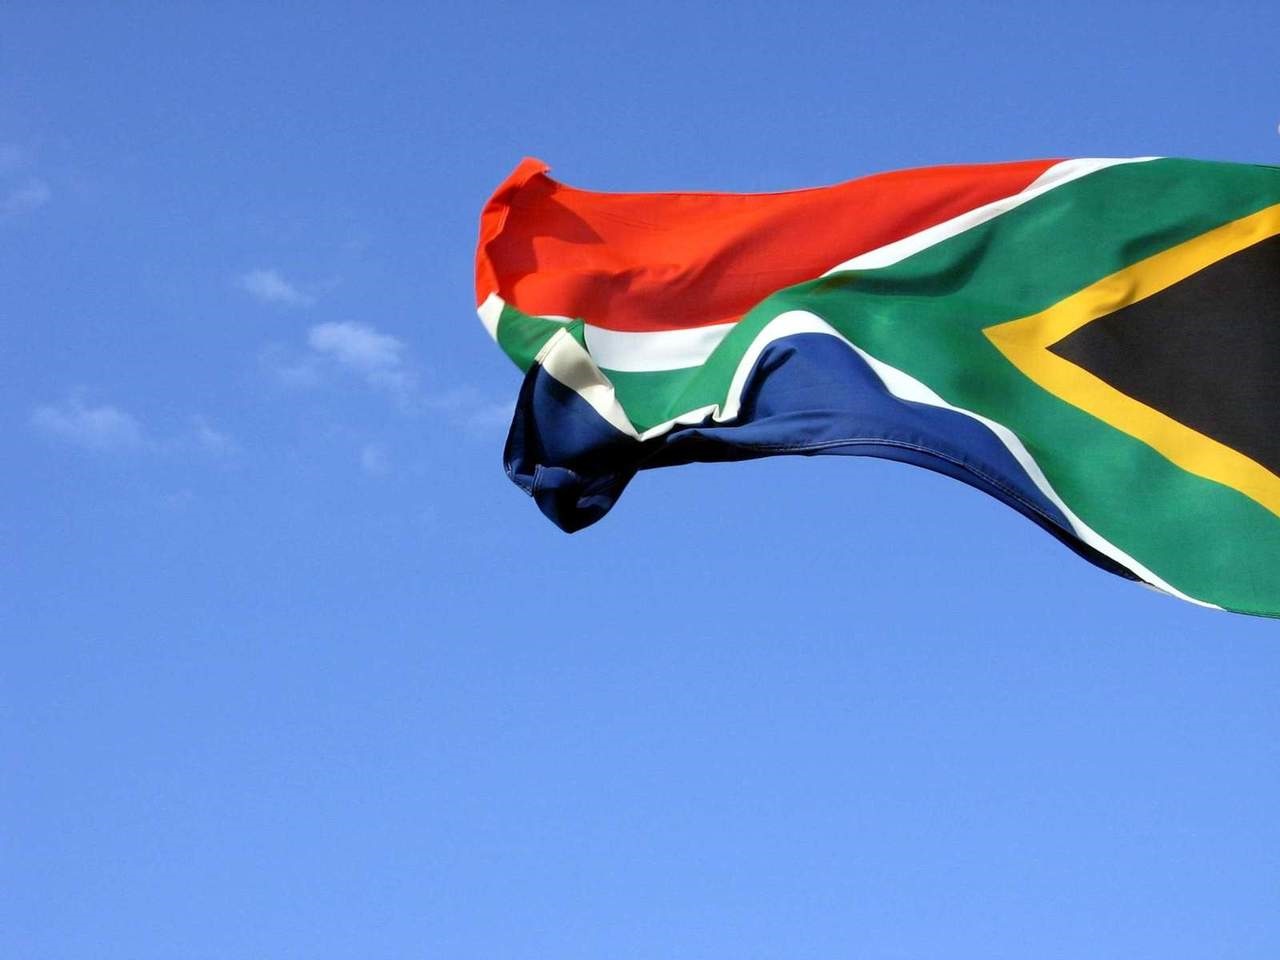 Trade binary options in south africa